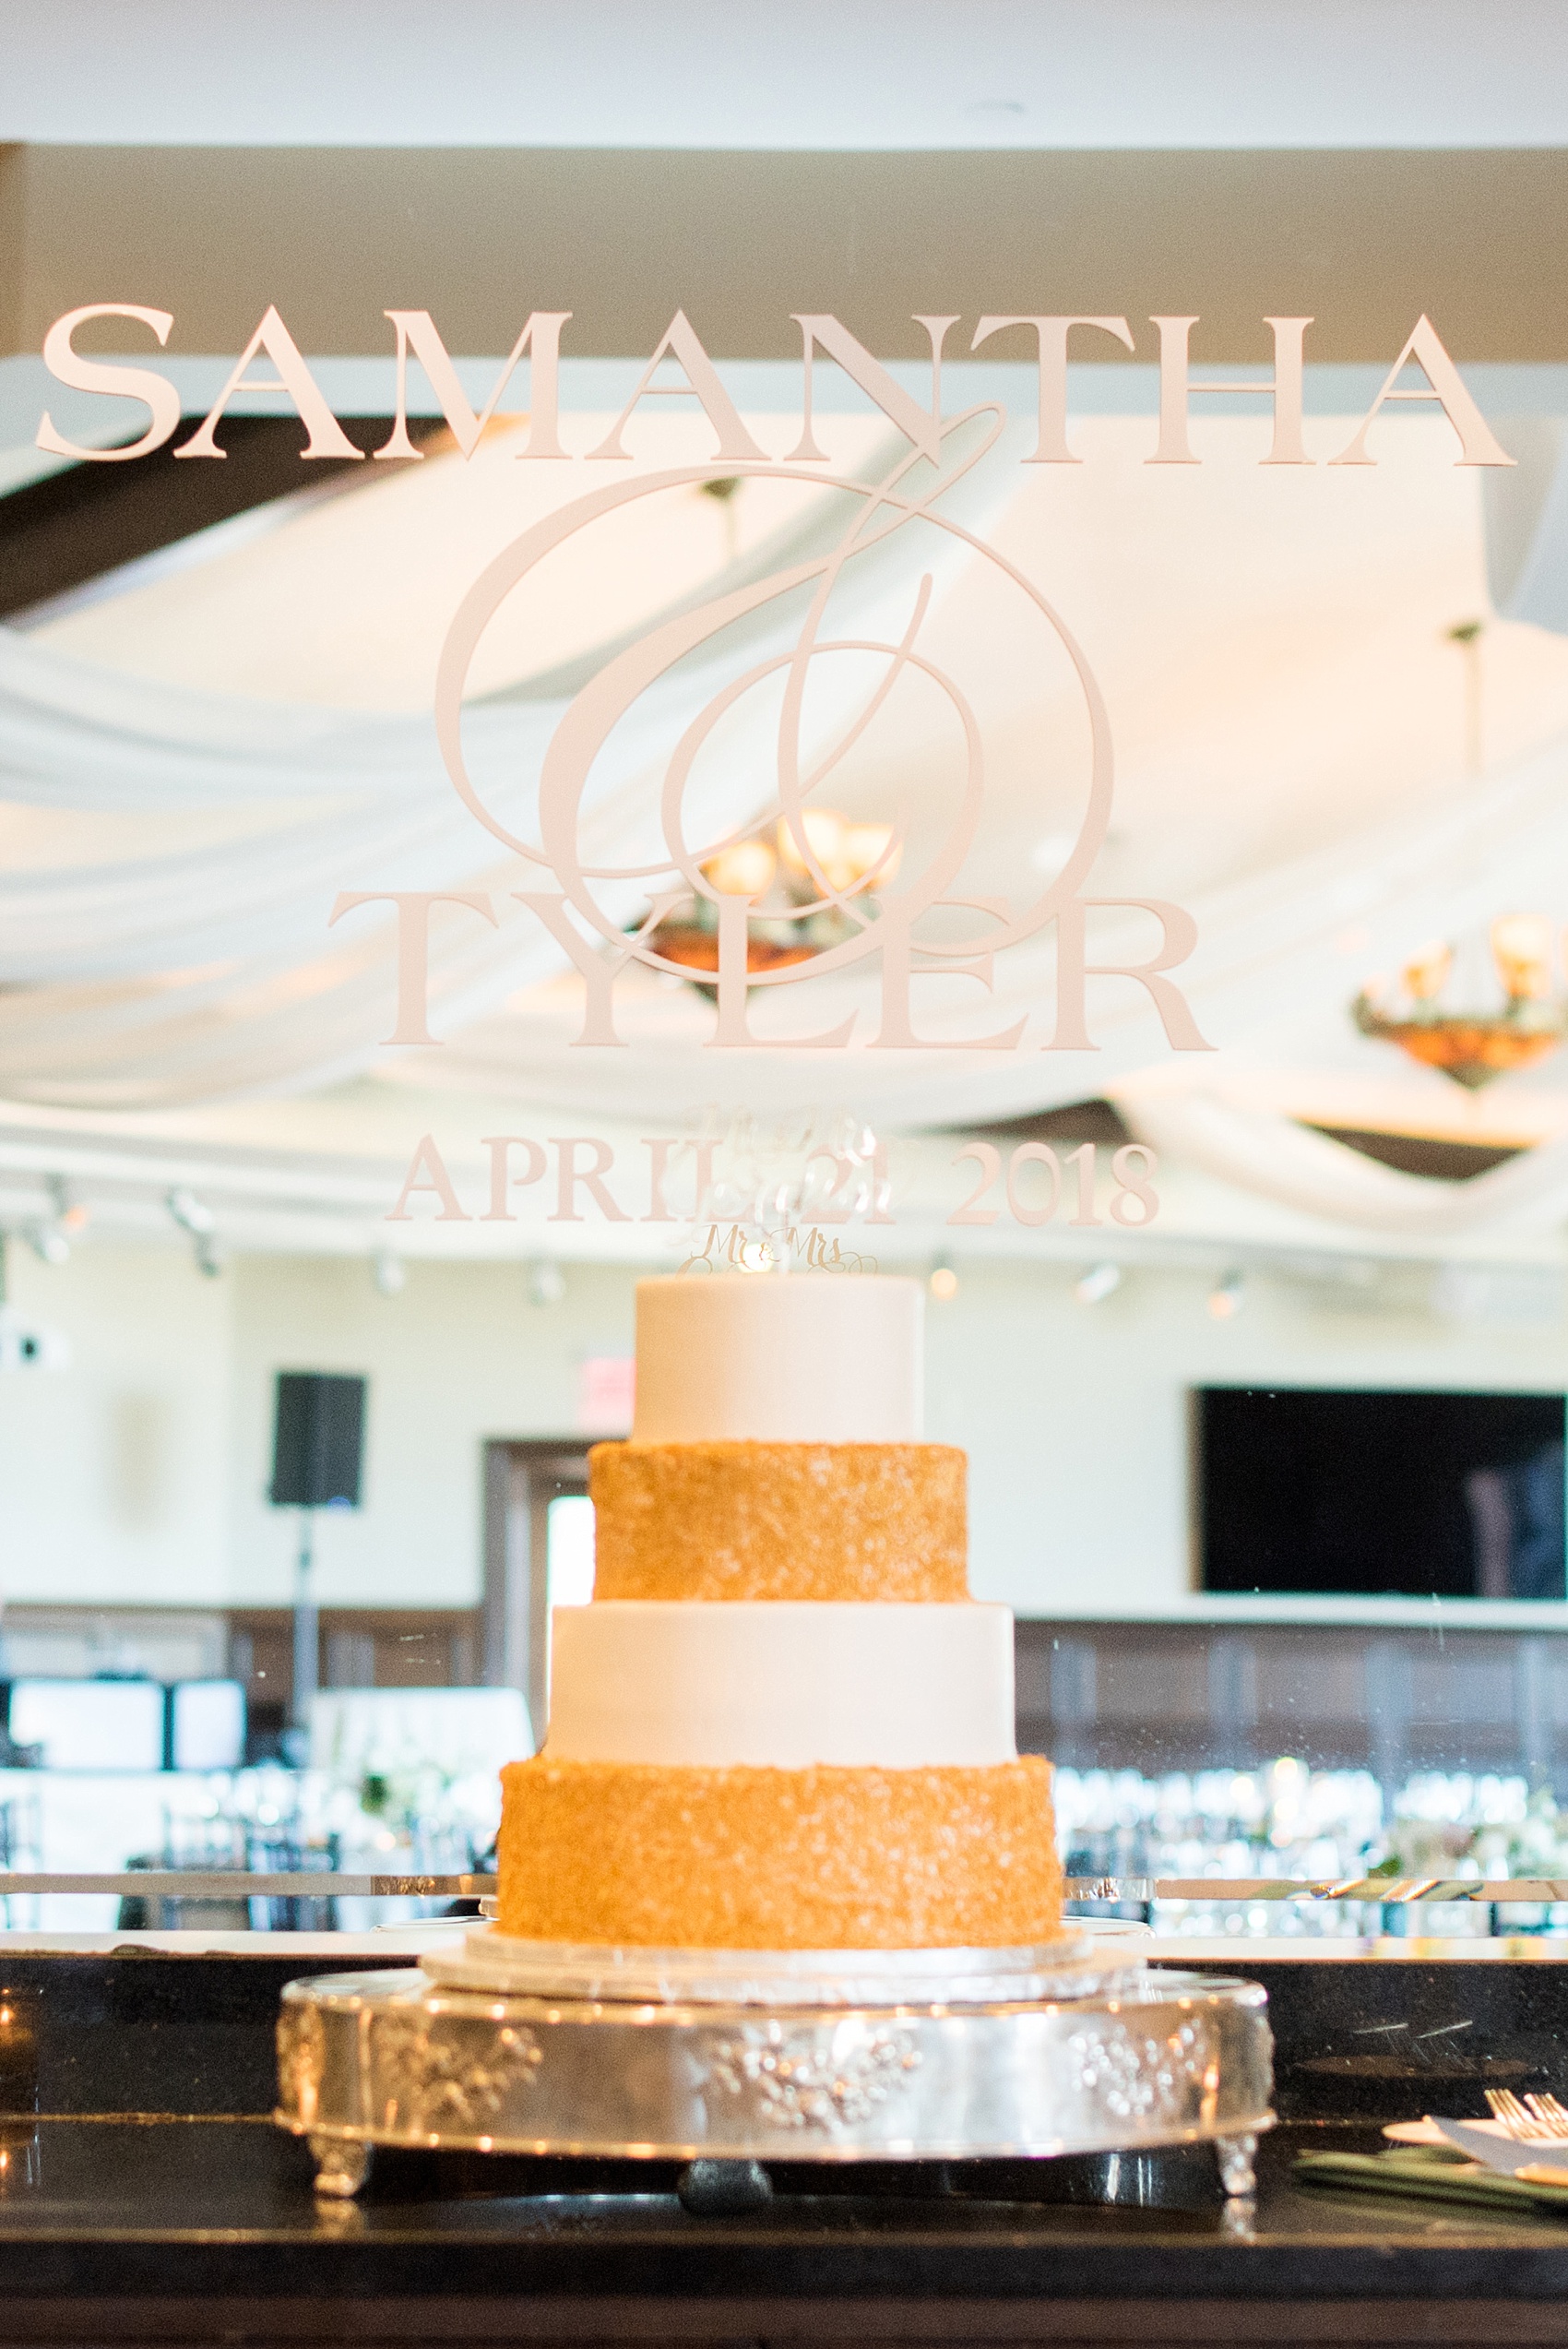 Saratoga Springs destination wedding photos by Mikkel Paige Photography. The gold and white cake was covered in gold sprinkles and white fondant, with a custom script gold acrylic cake topper. The spring reception was held at Saratoga National Golf Club venue. #SaratogaSpringsNY #SaratogaSprings #mikkelpaige #NYwedding #destinationwedding